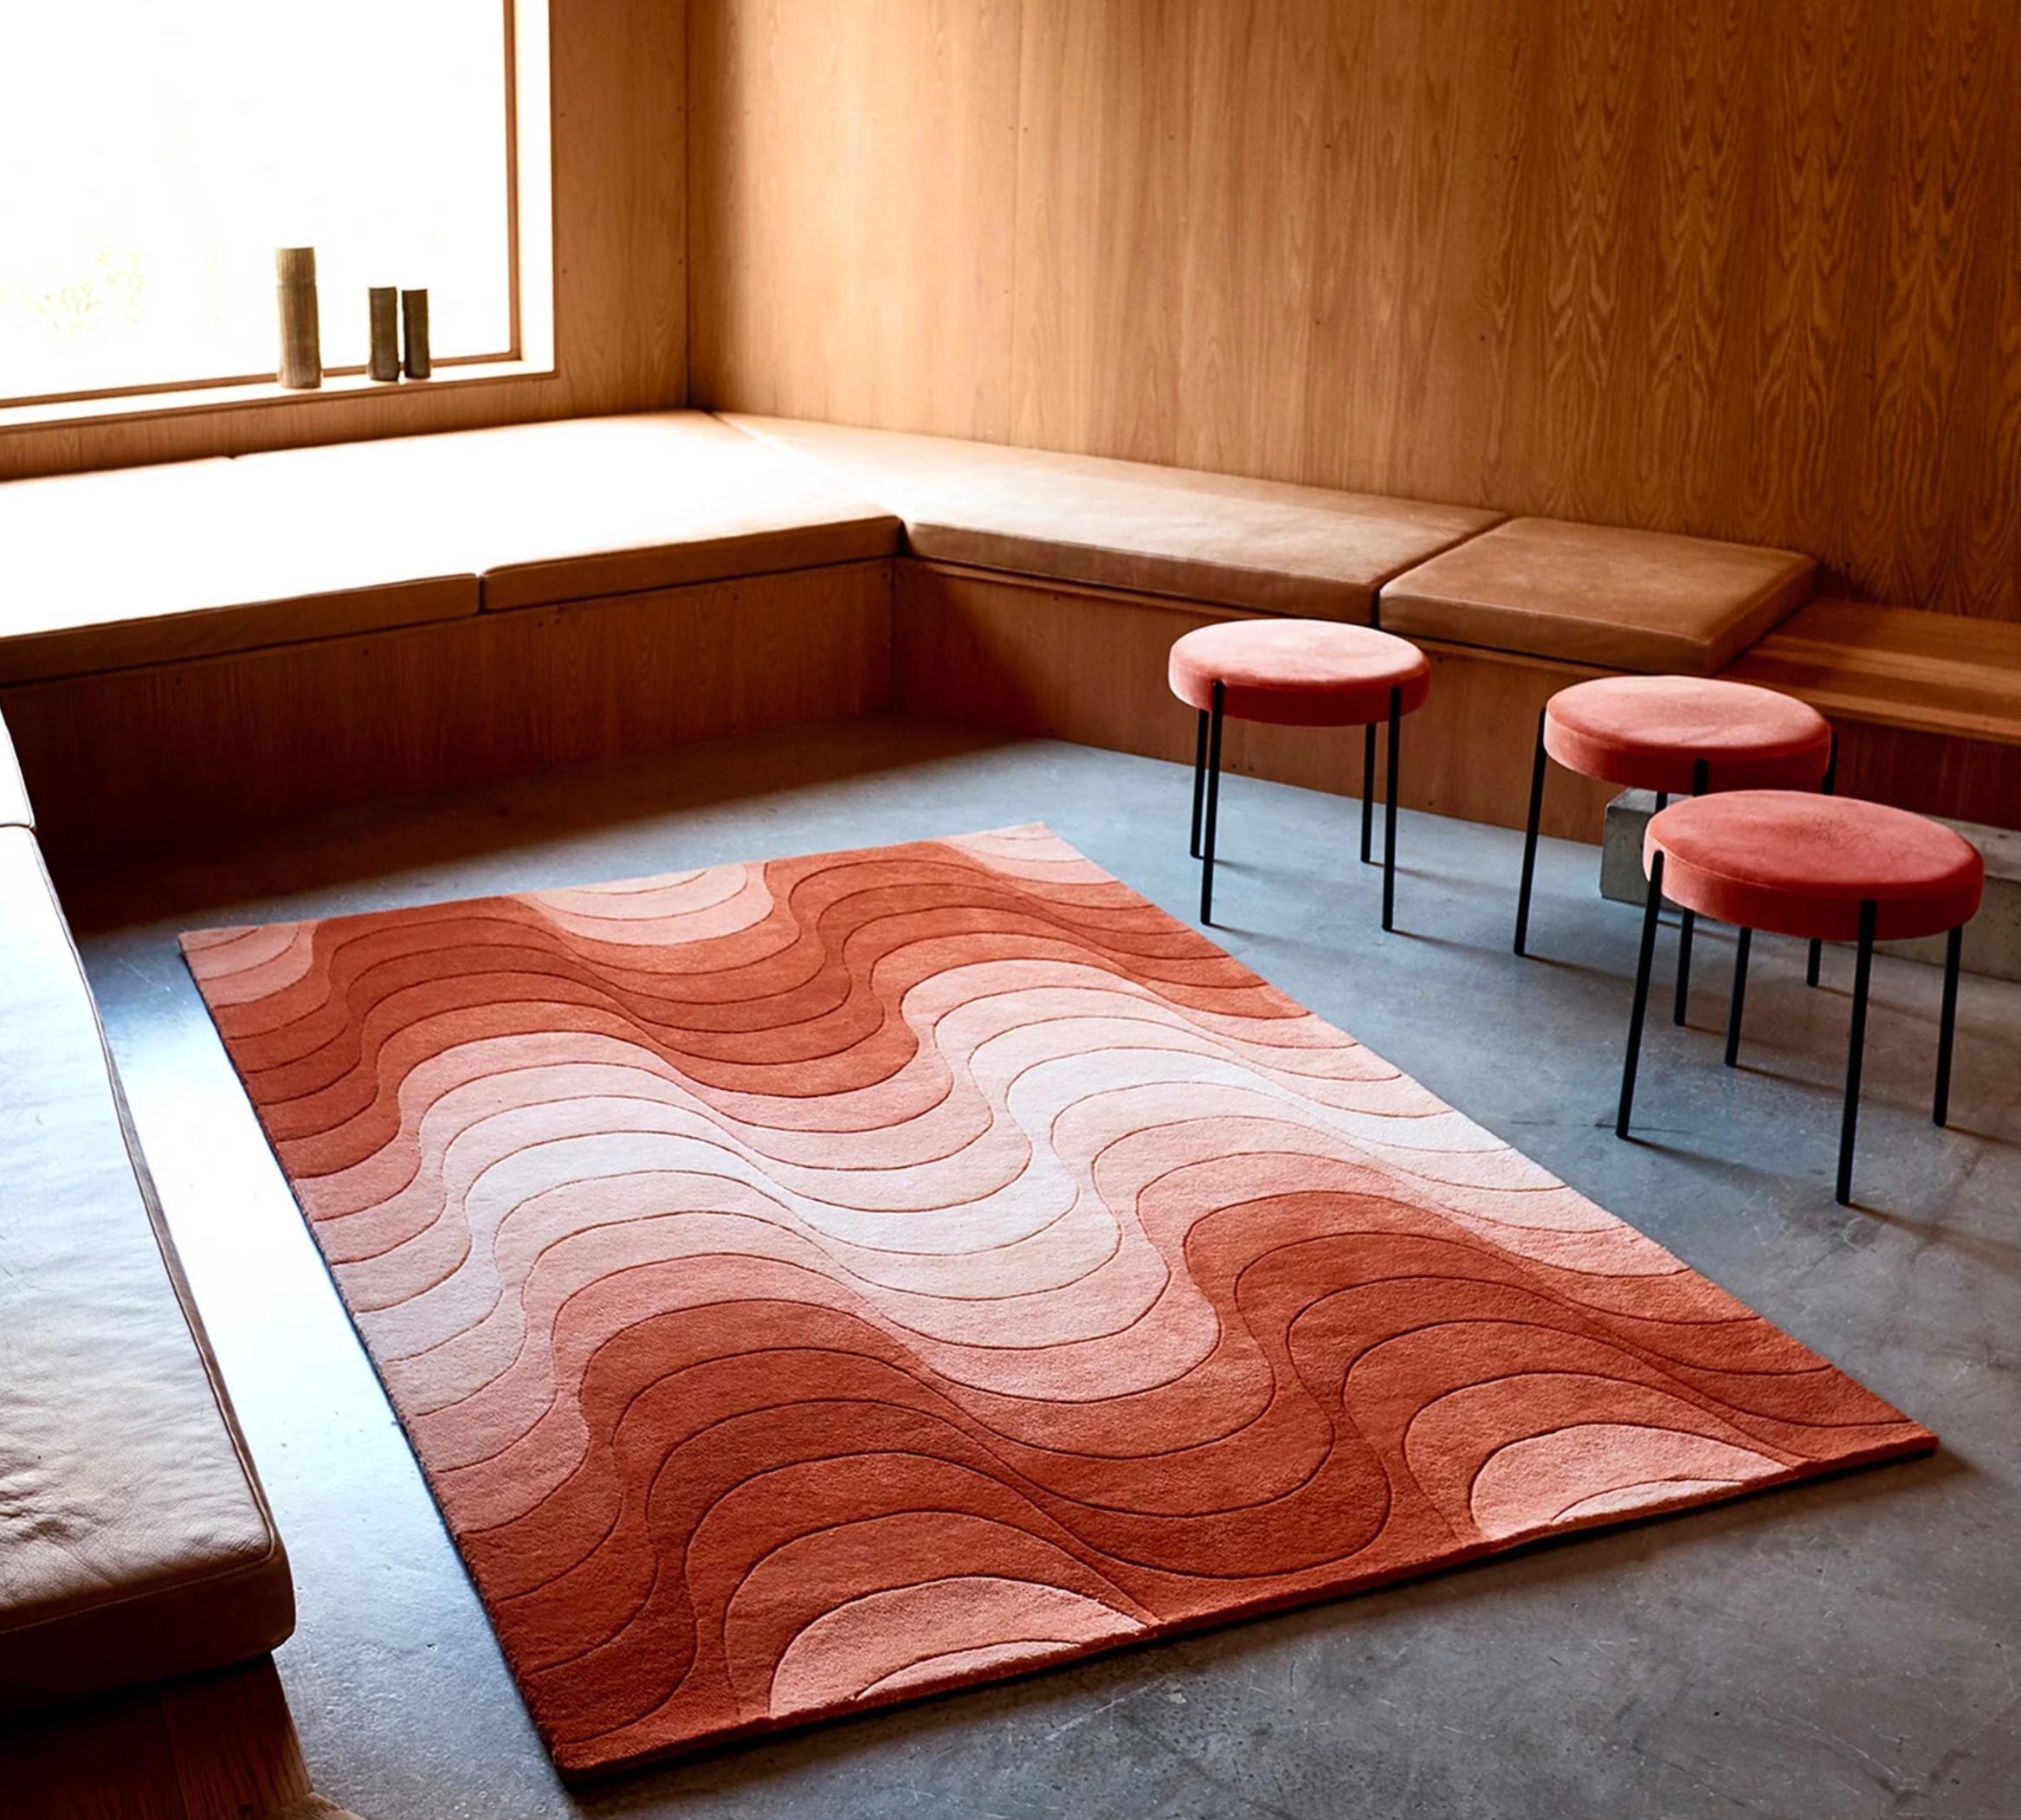 Verner Panton 'Wave' Rug 240 x 170cm for Verpan. Current production.

As well as adding a sculptural feature to a room, rugs also serve to emphasize and/or transform the dimensions of the space. All Verpan carpets are made from hand-woven 100% New